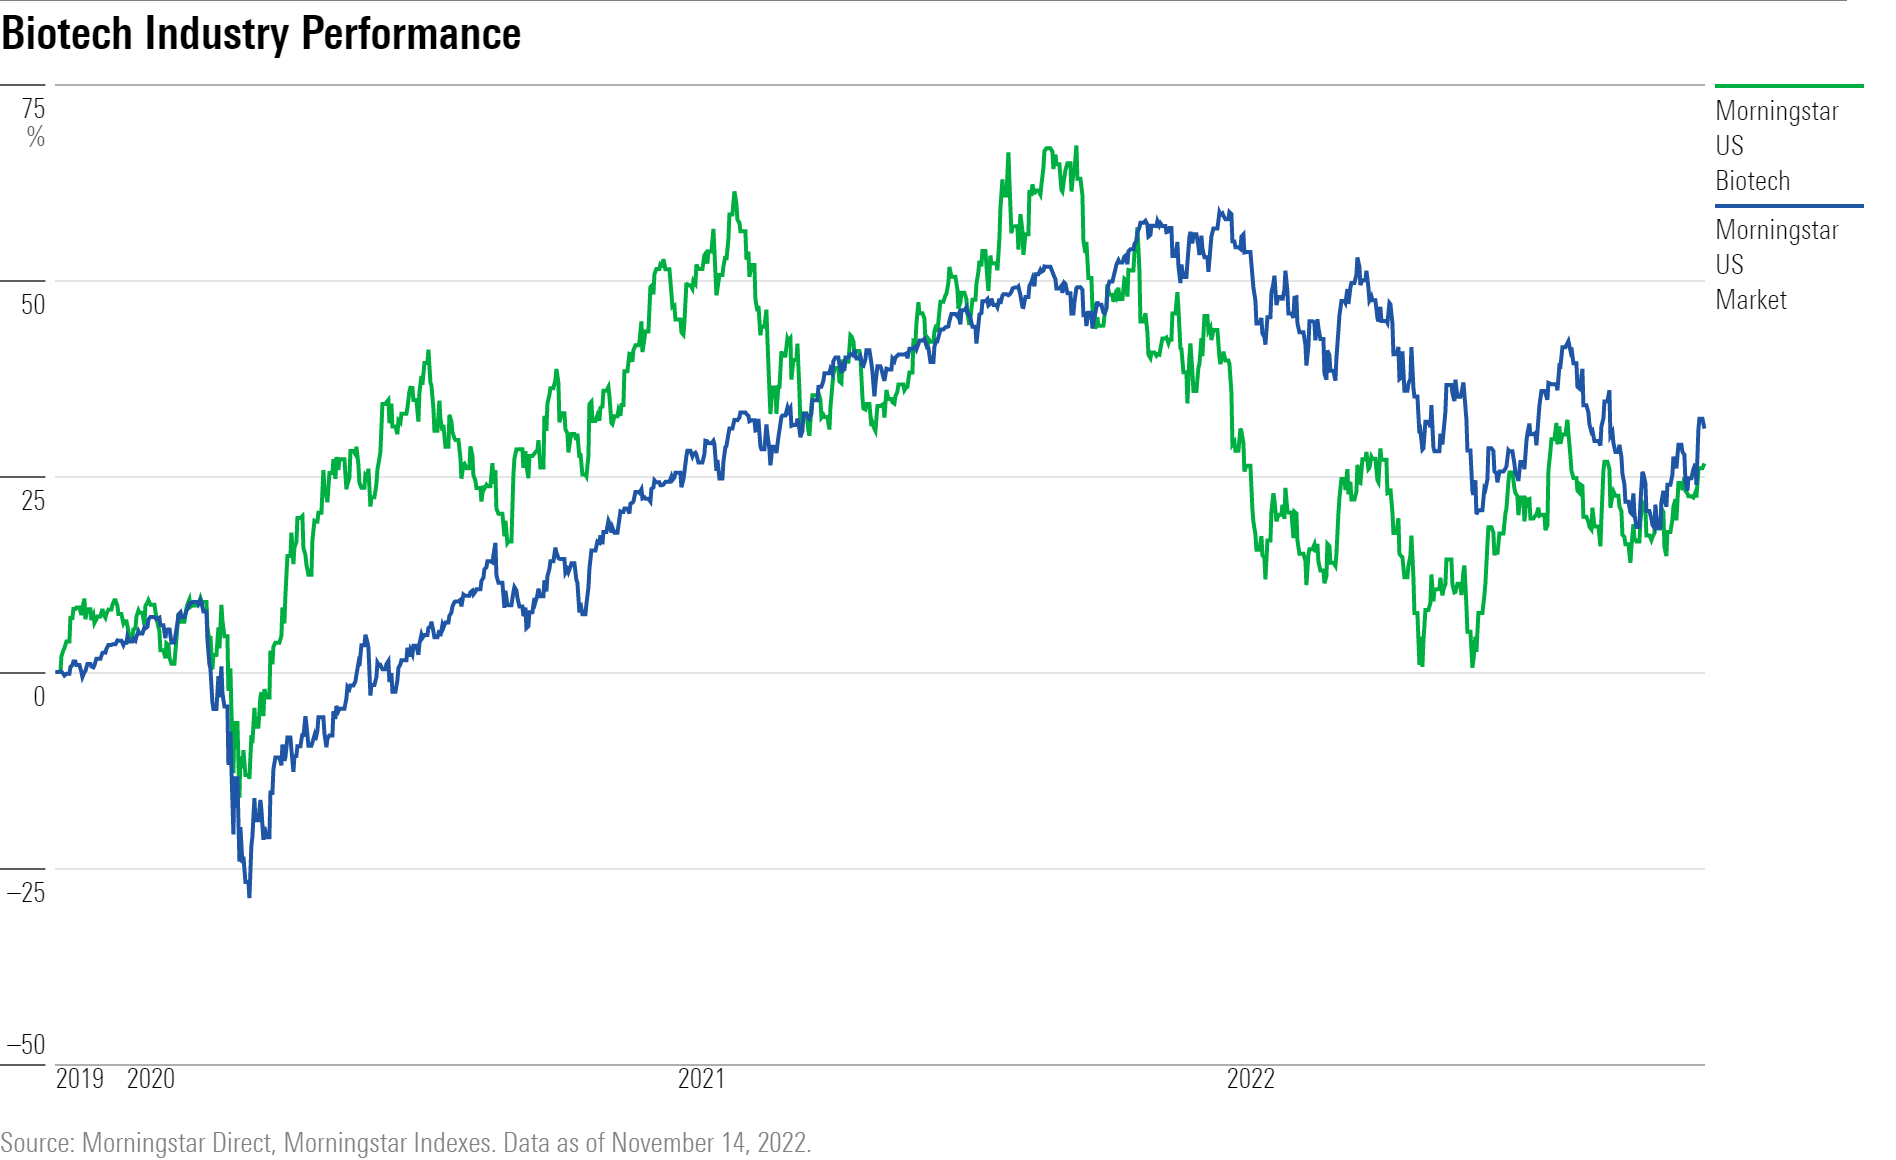 Line chart showing 3-year performance of the Morningstar US Biotech and the Morningstar US Market indexes.